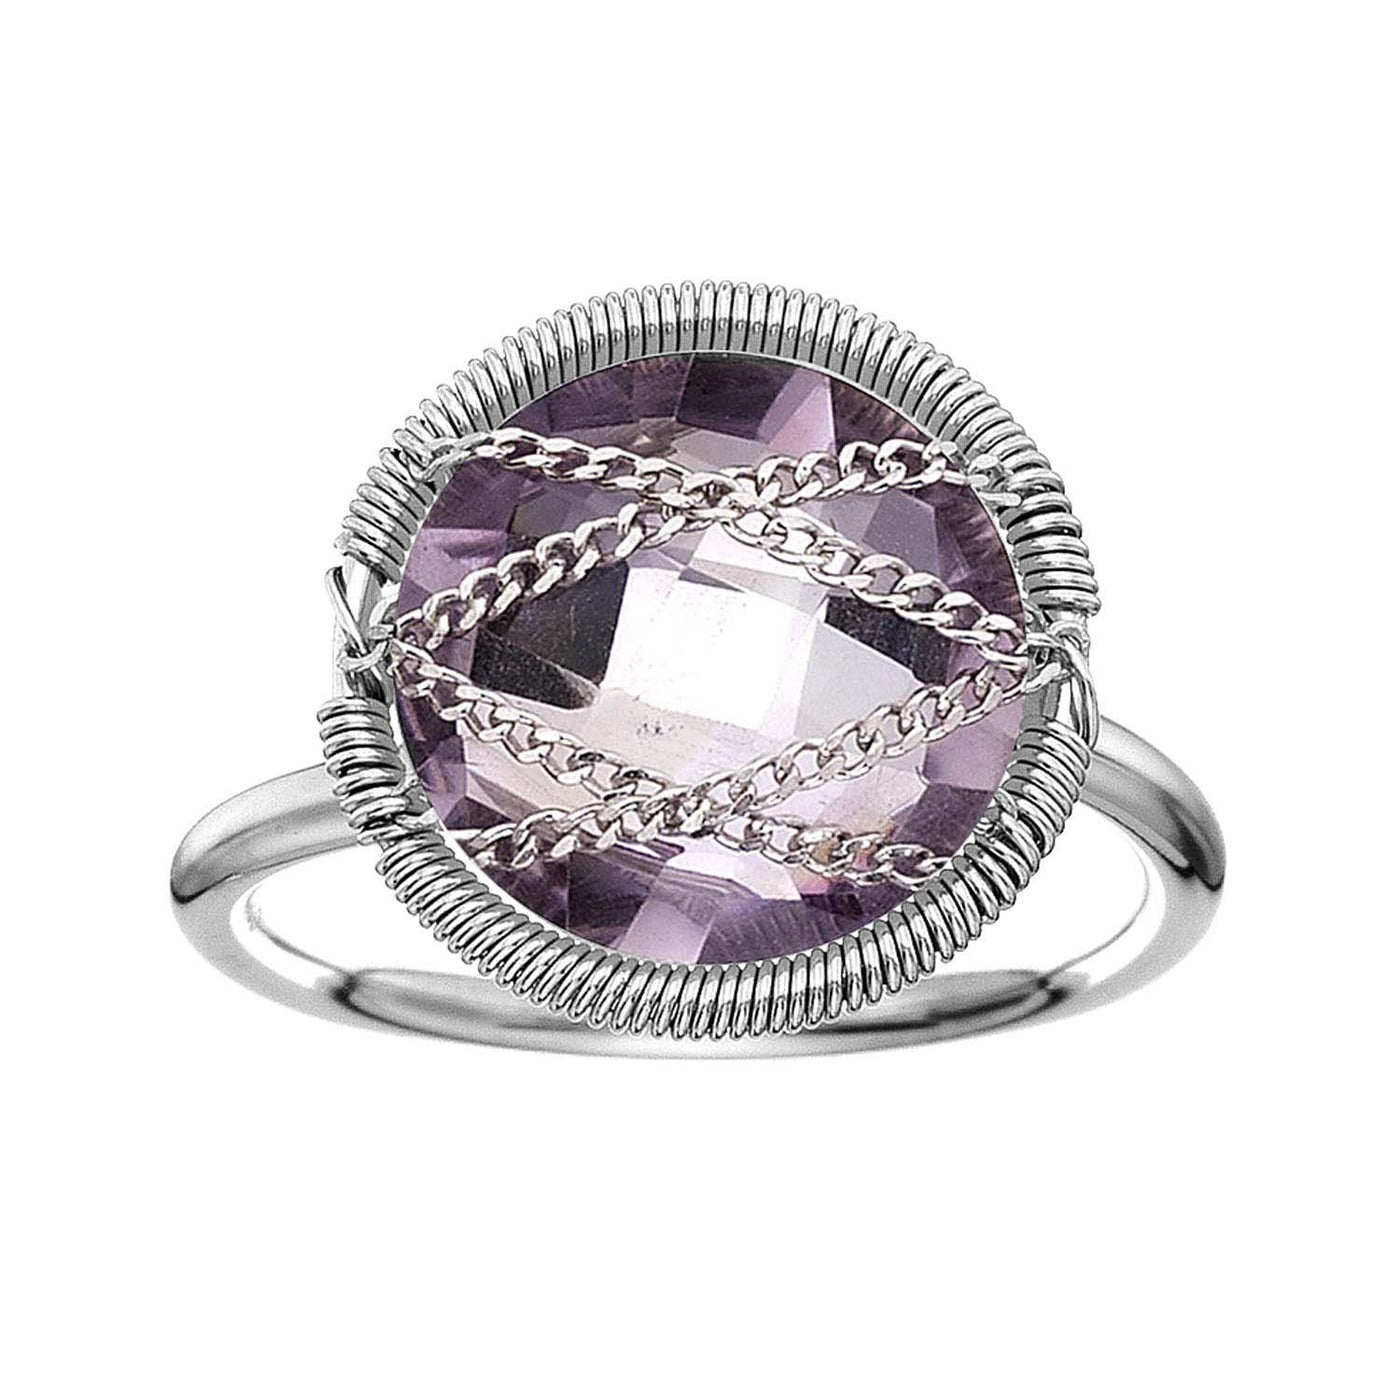 Rebecca Sloane Silver Hand Wrapped Round Amethyst Stone Ring